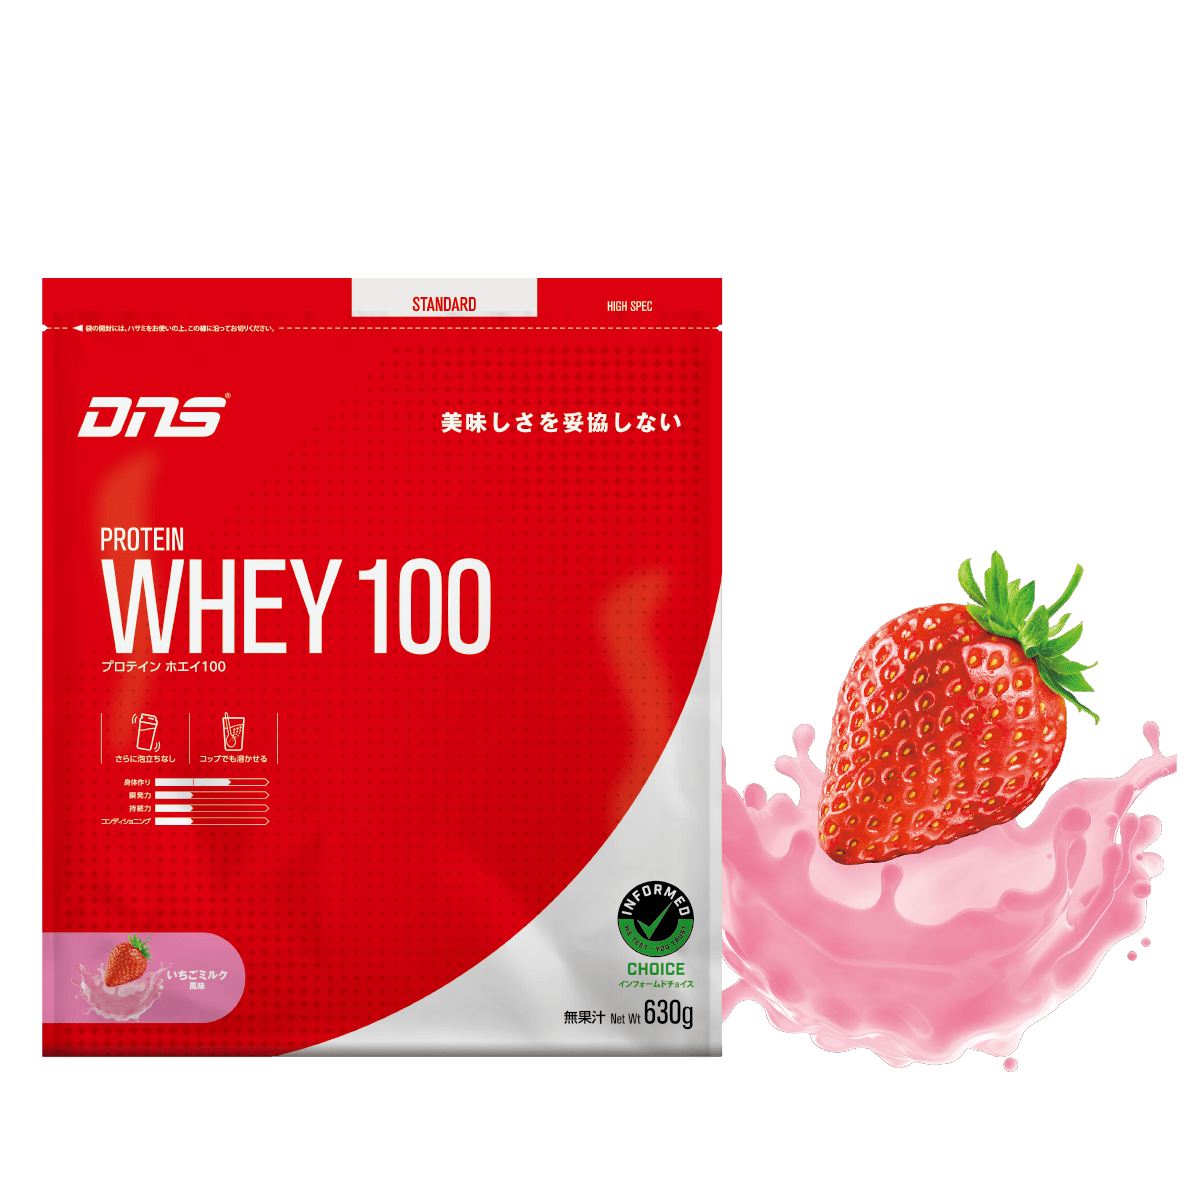 PROTEIN WHEY100 味のススメ | DESIRE TO EVOLUTION「DNS」